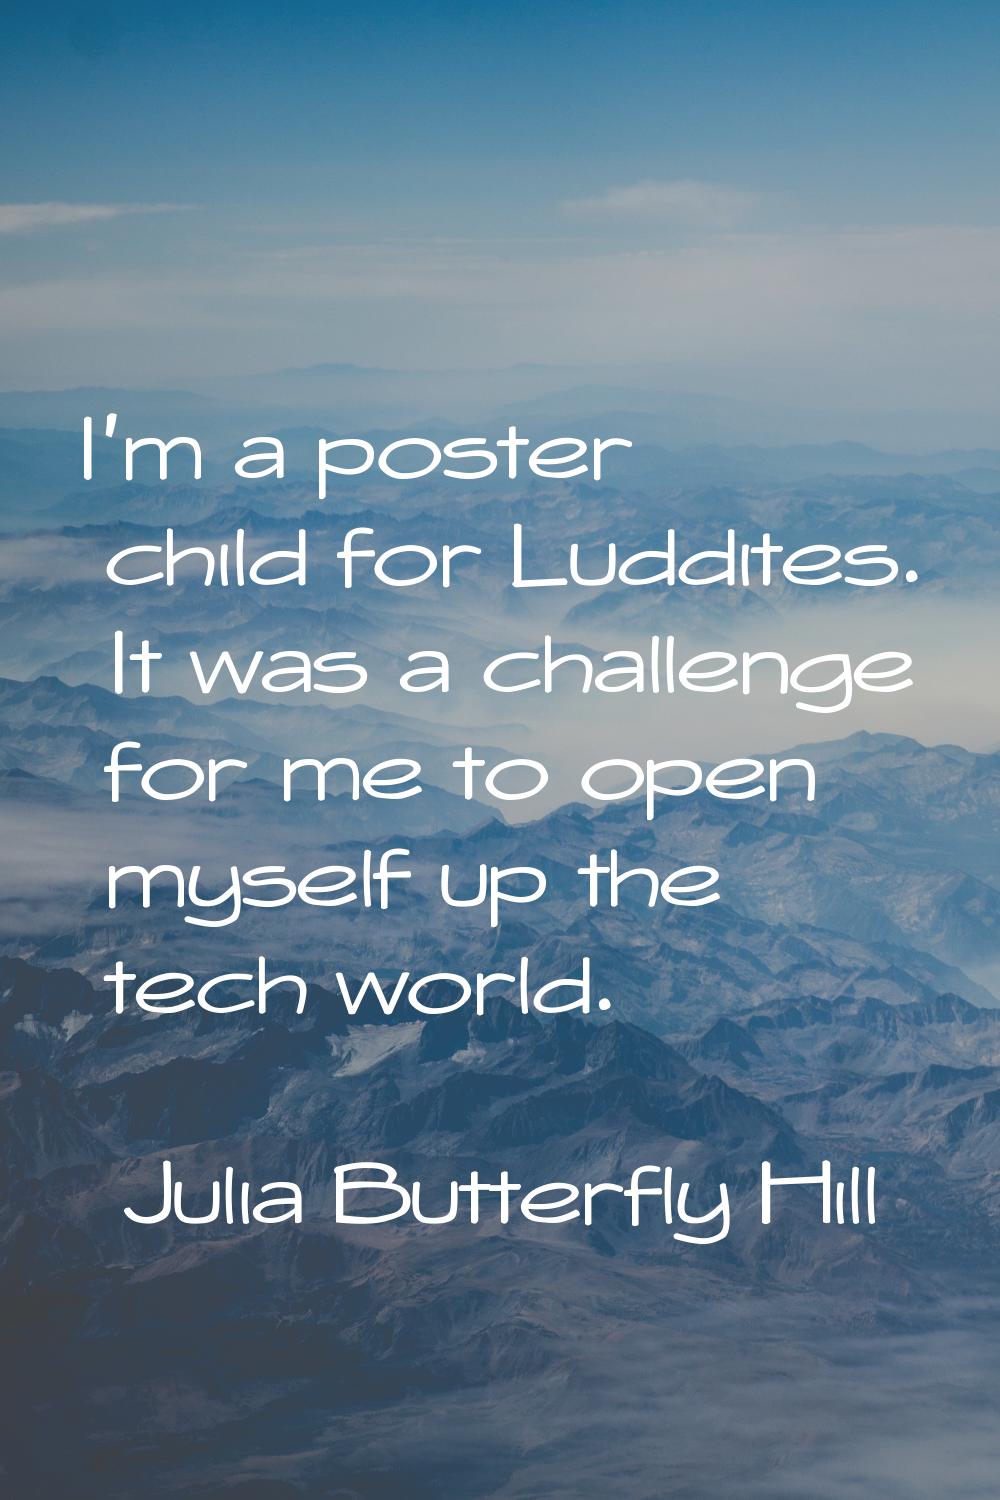 I'm a poster child for Luddites. It was a challenge for me to open myself up the tech world.